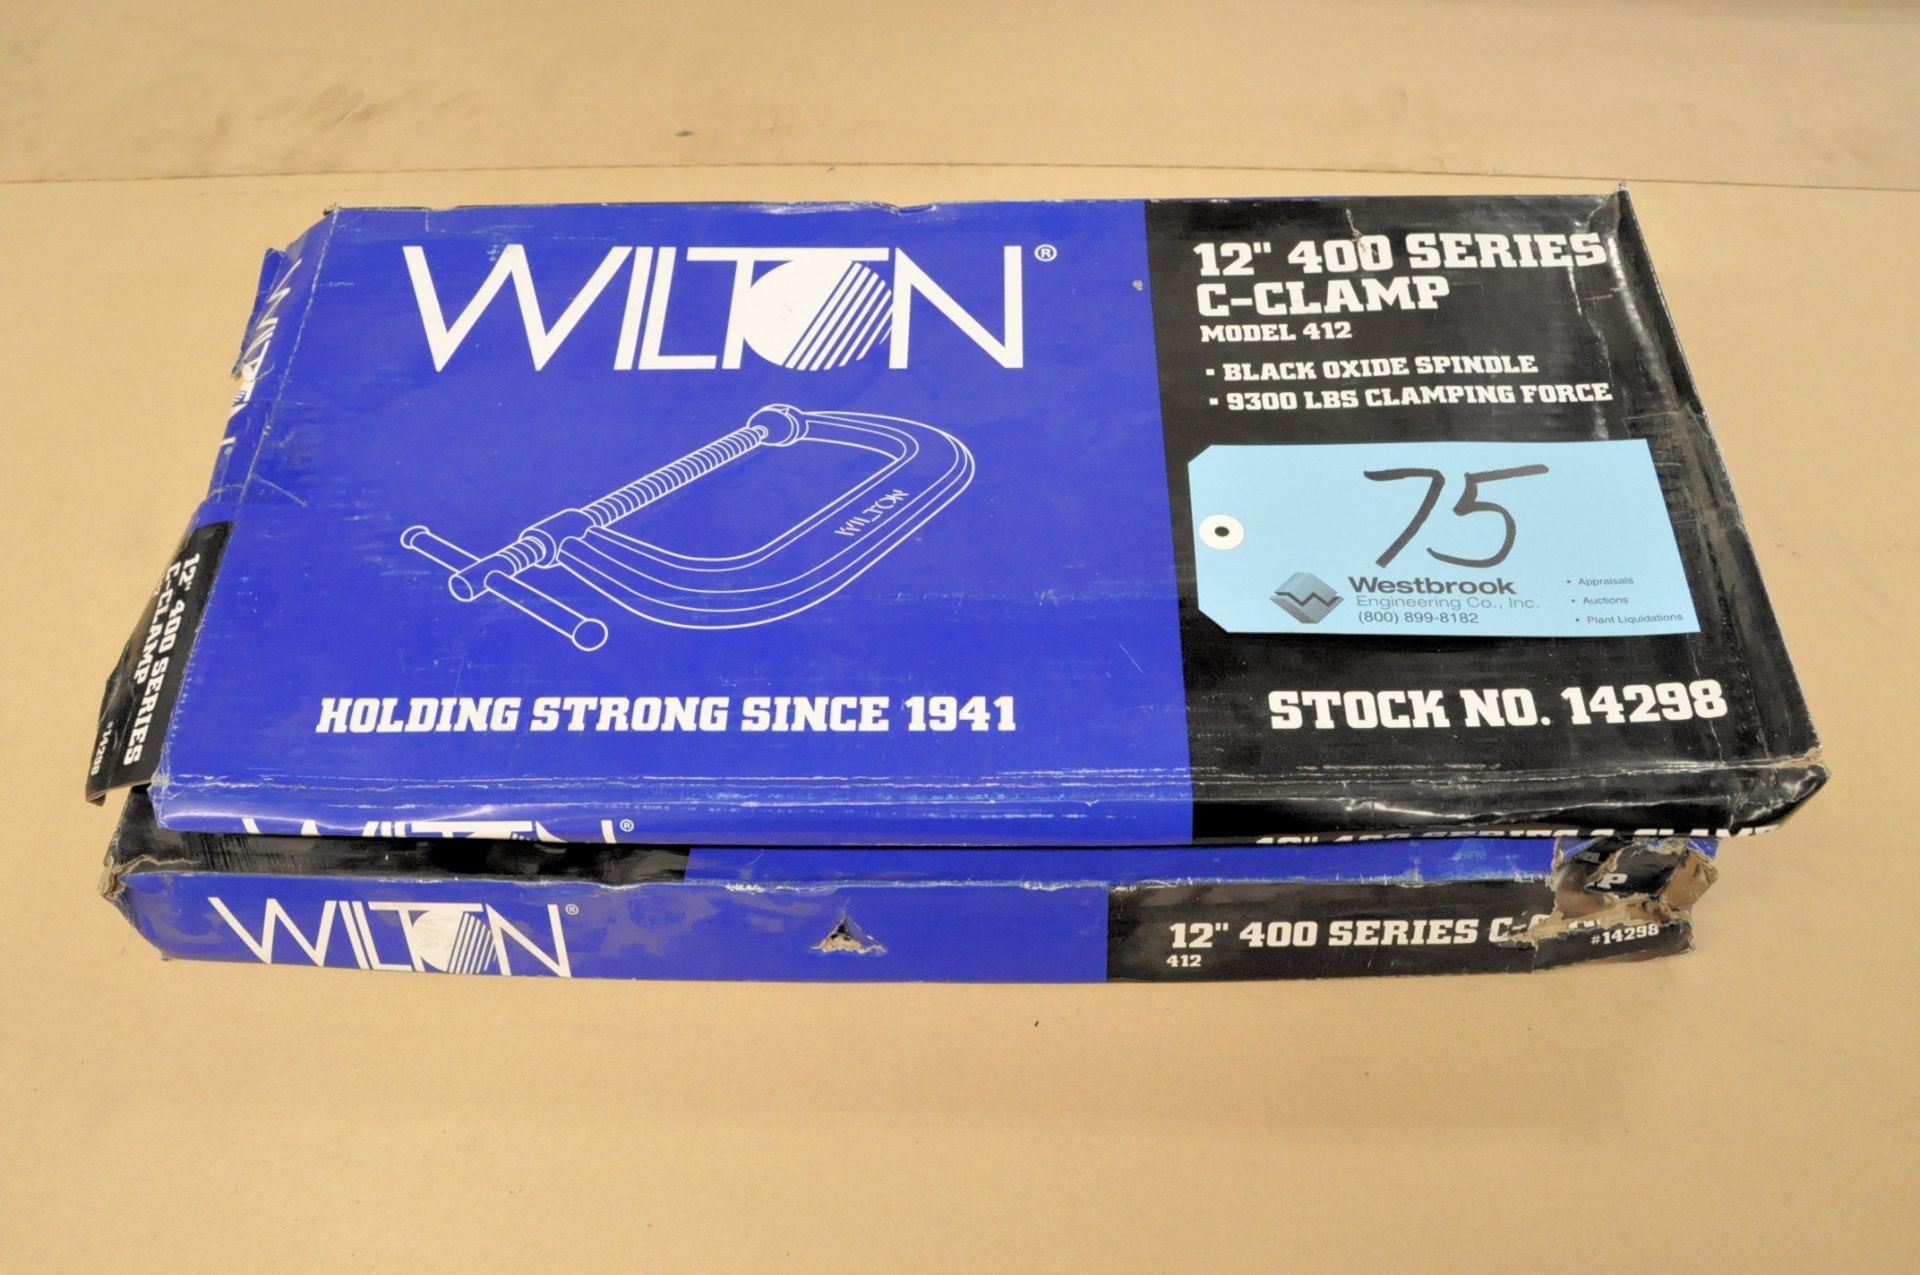 Lot-(2) Wilton No. 412, 12" C-Clamps, (Packaged)